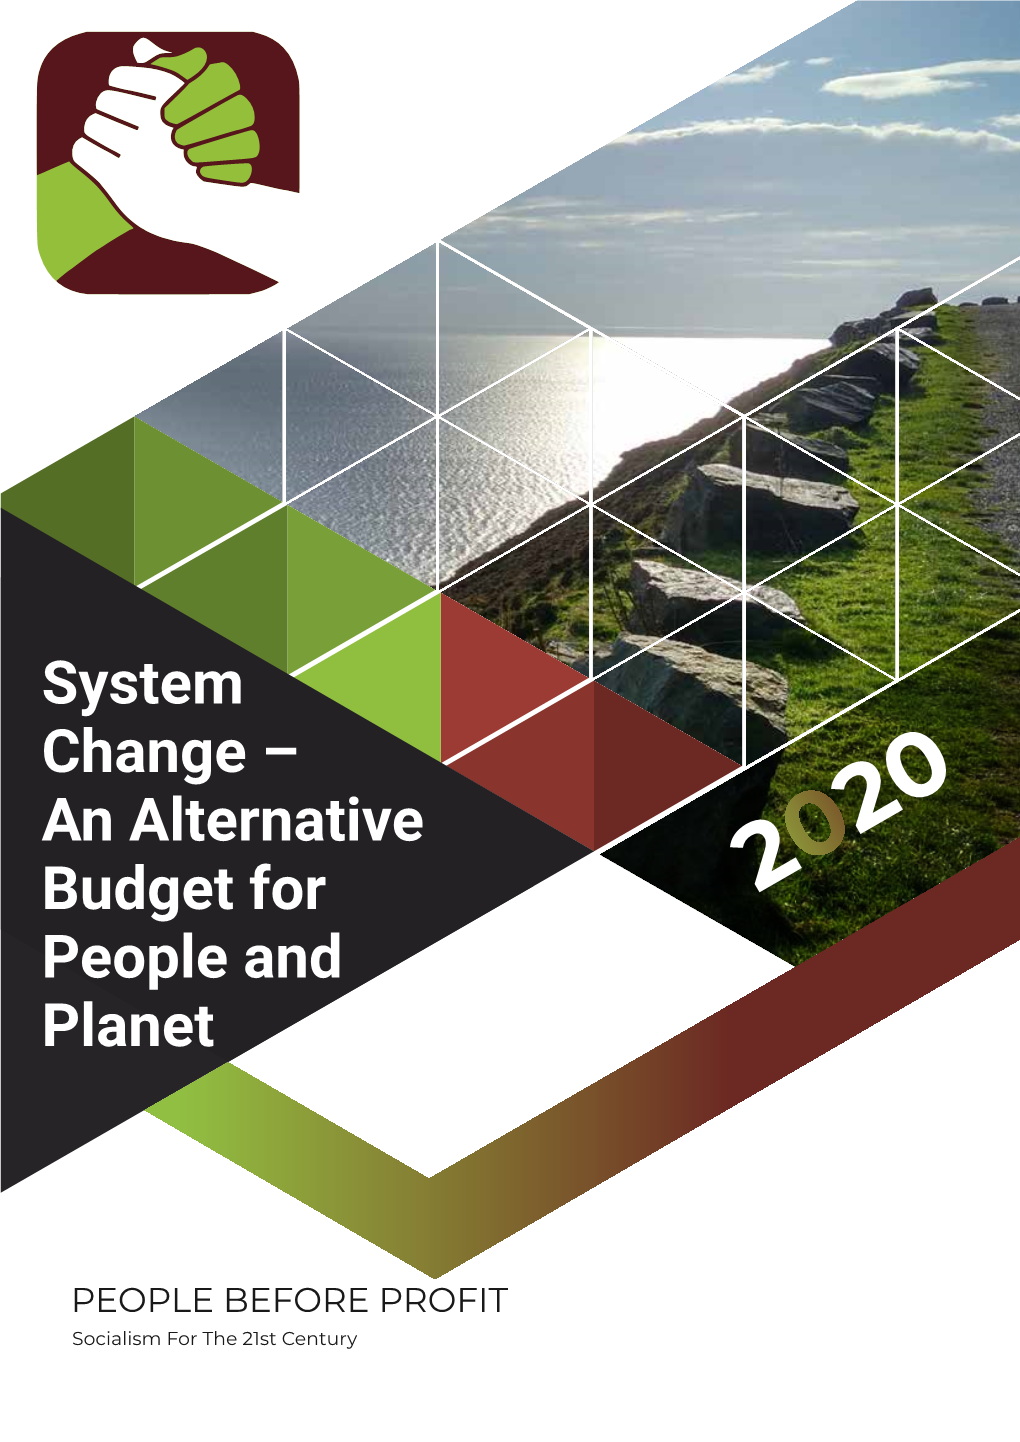 System Change – an Alternative Budget for People and Planet